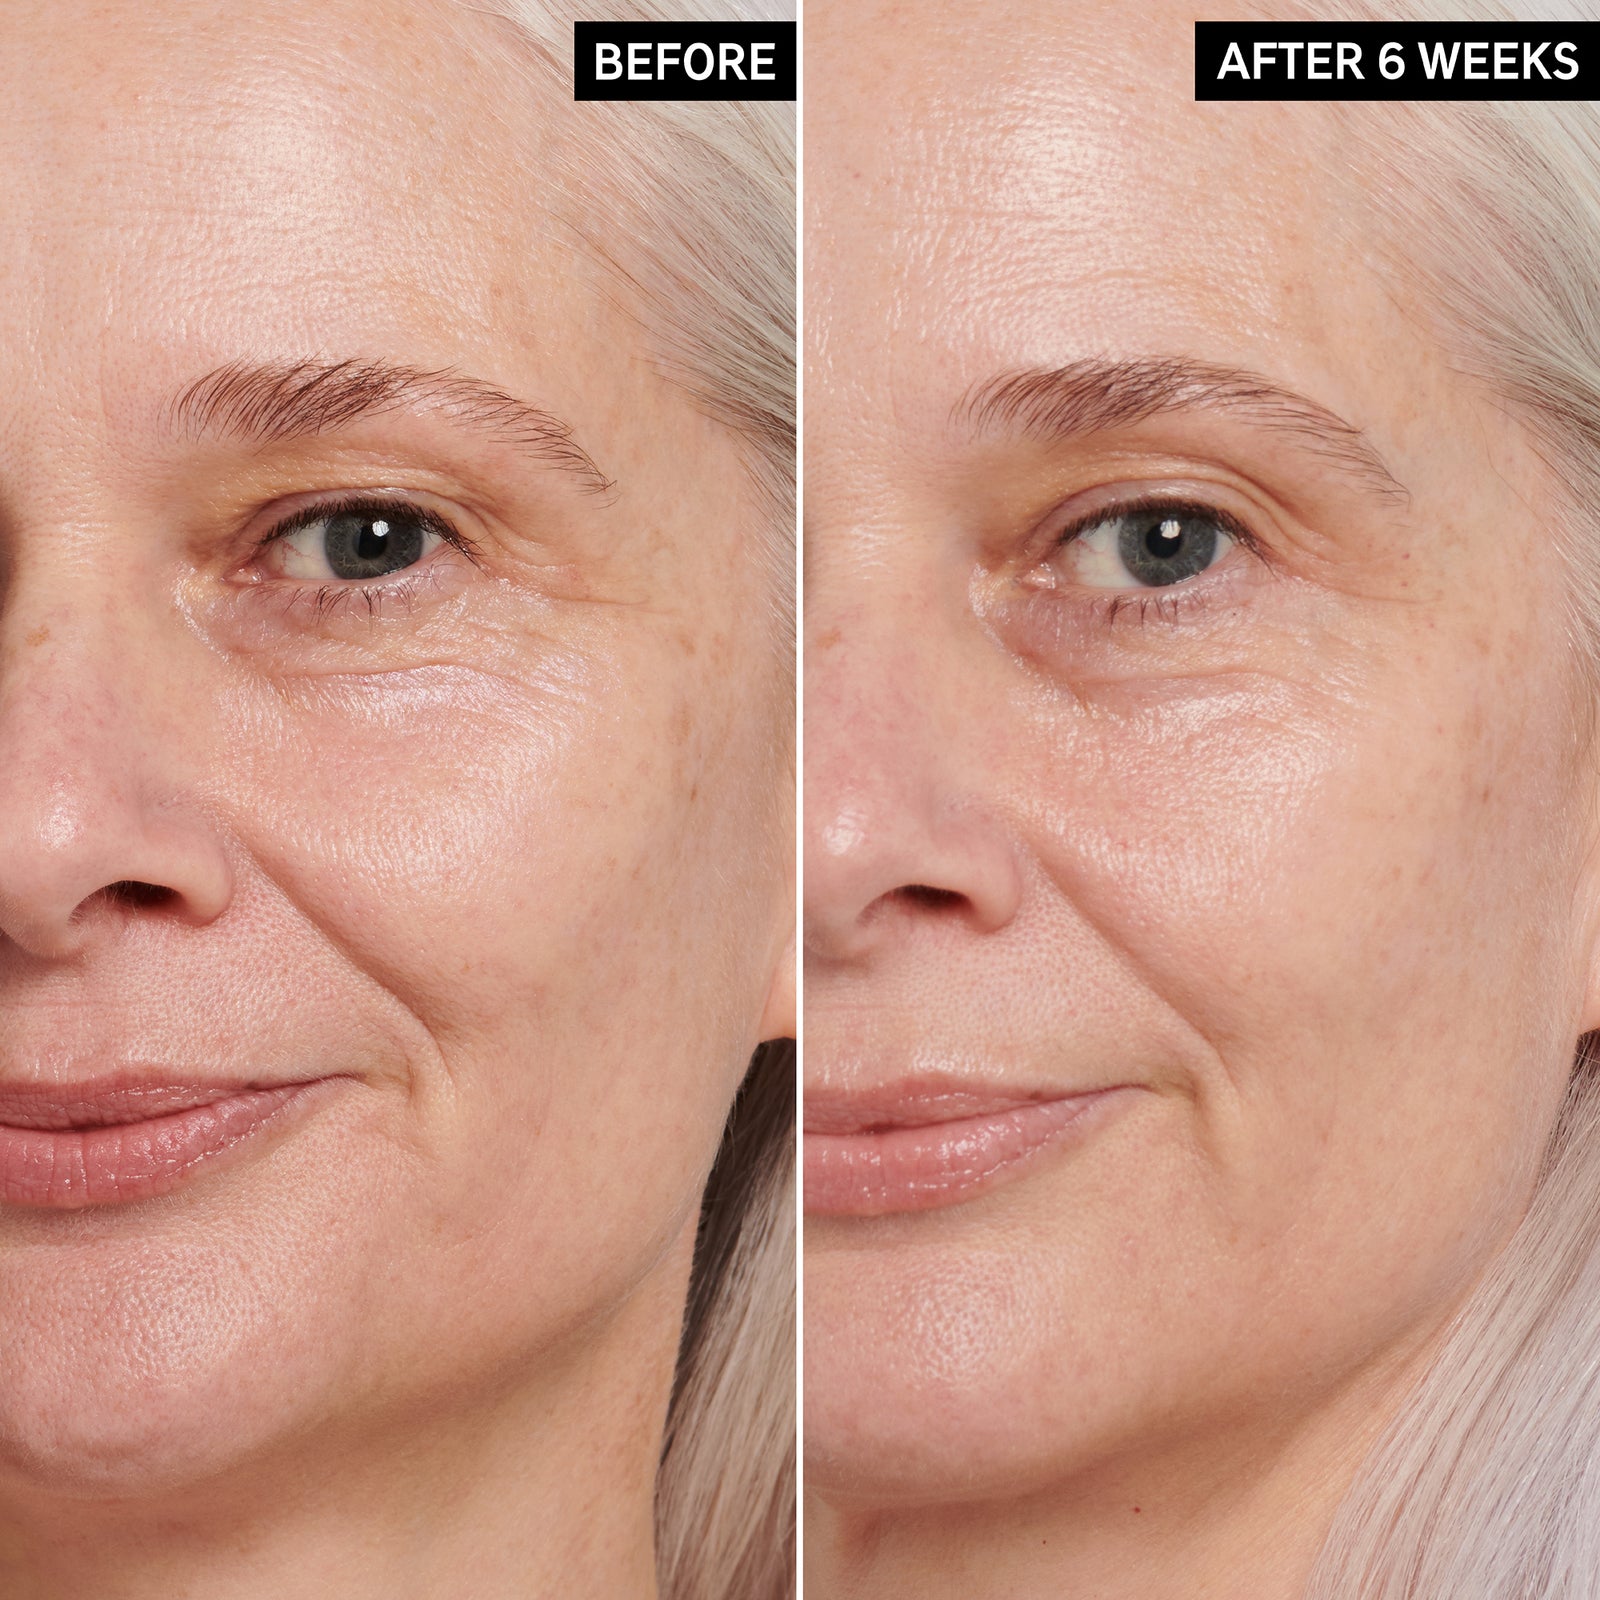 2 images of a mature model's face side by side to show before and after using Retinol Eye Cream for 6 weeks